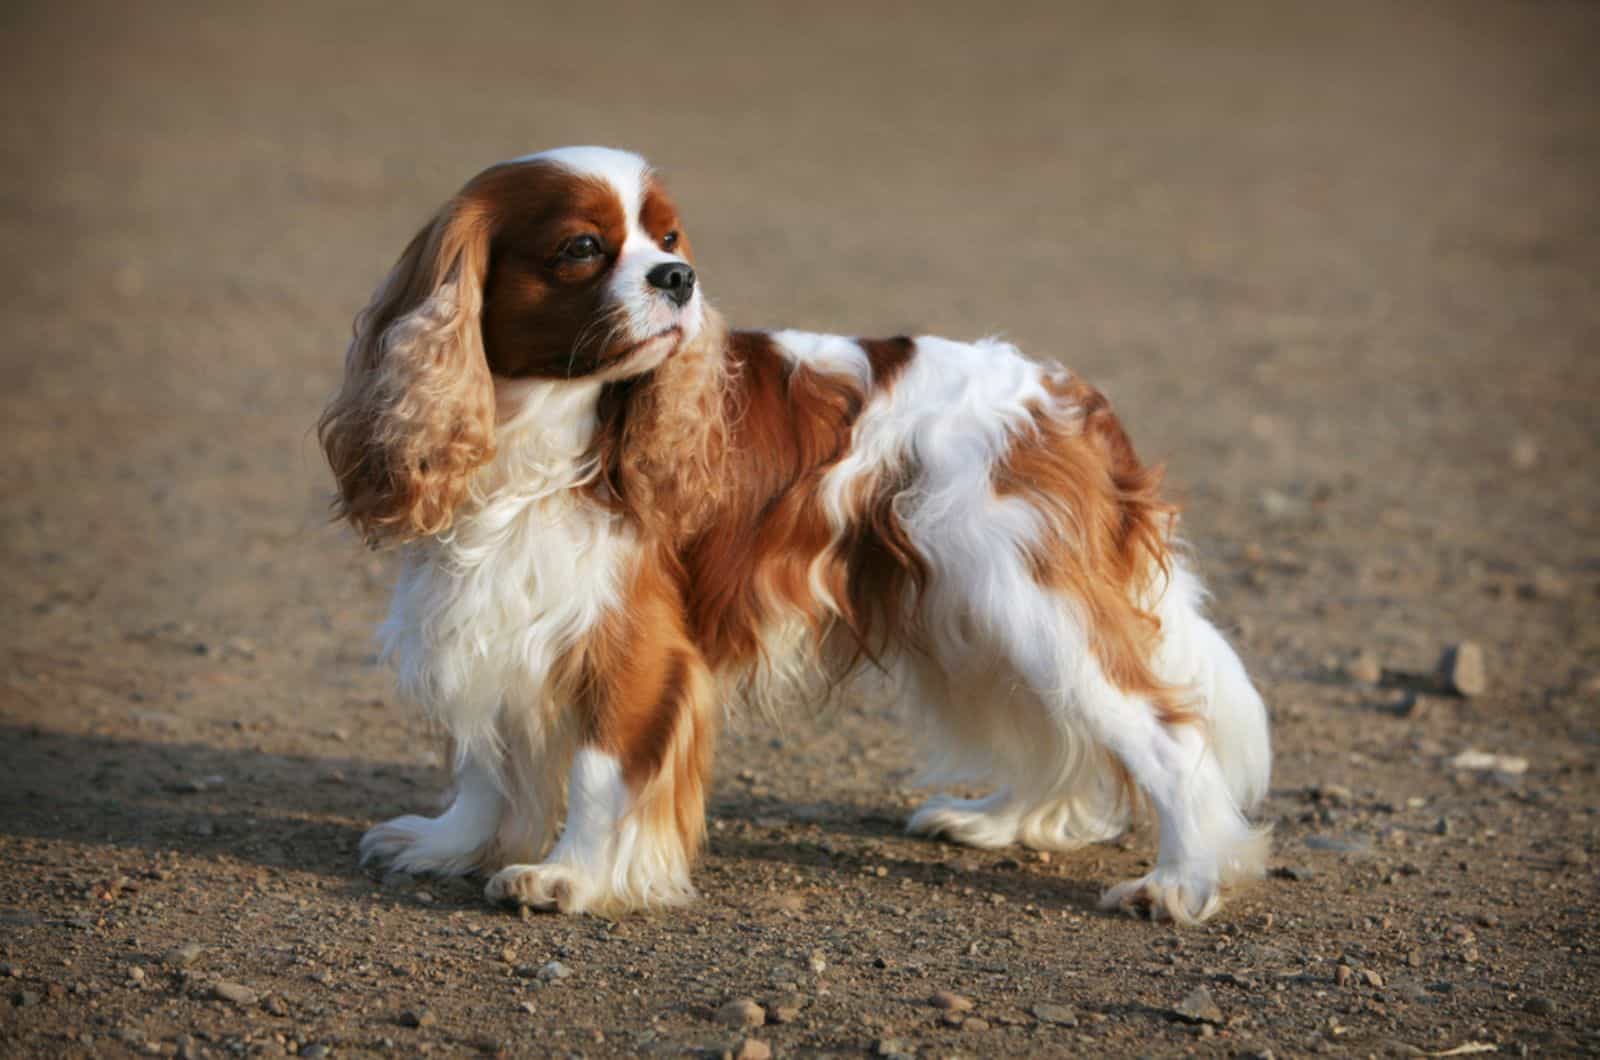 cavalier king charles spaniel dog standing on the road